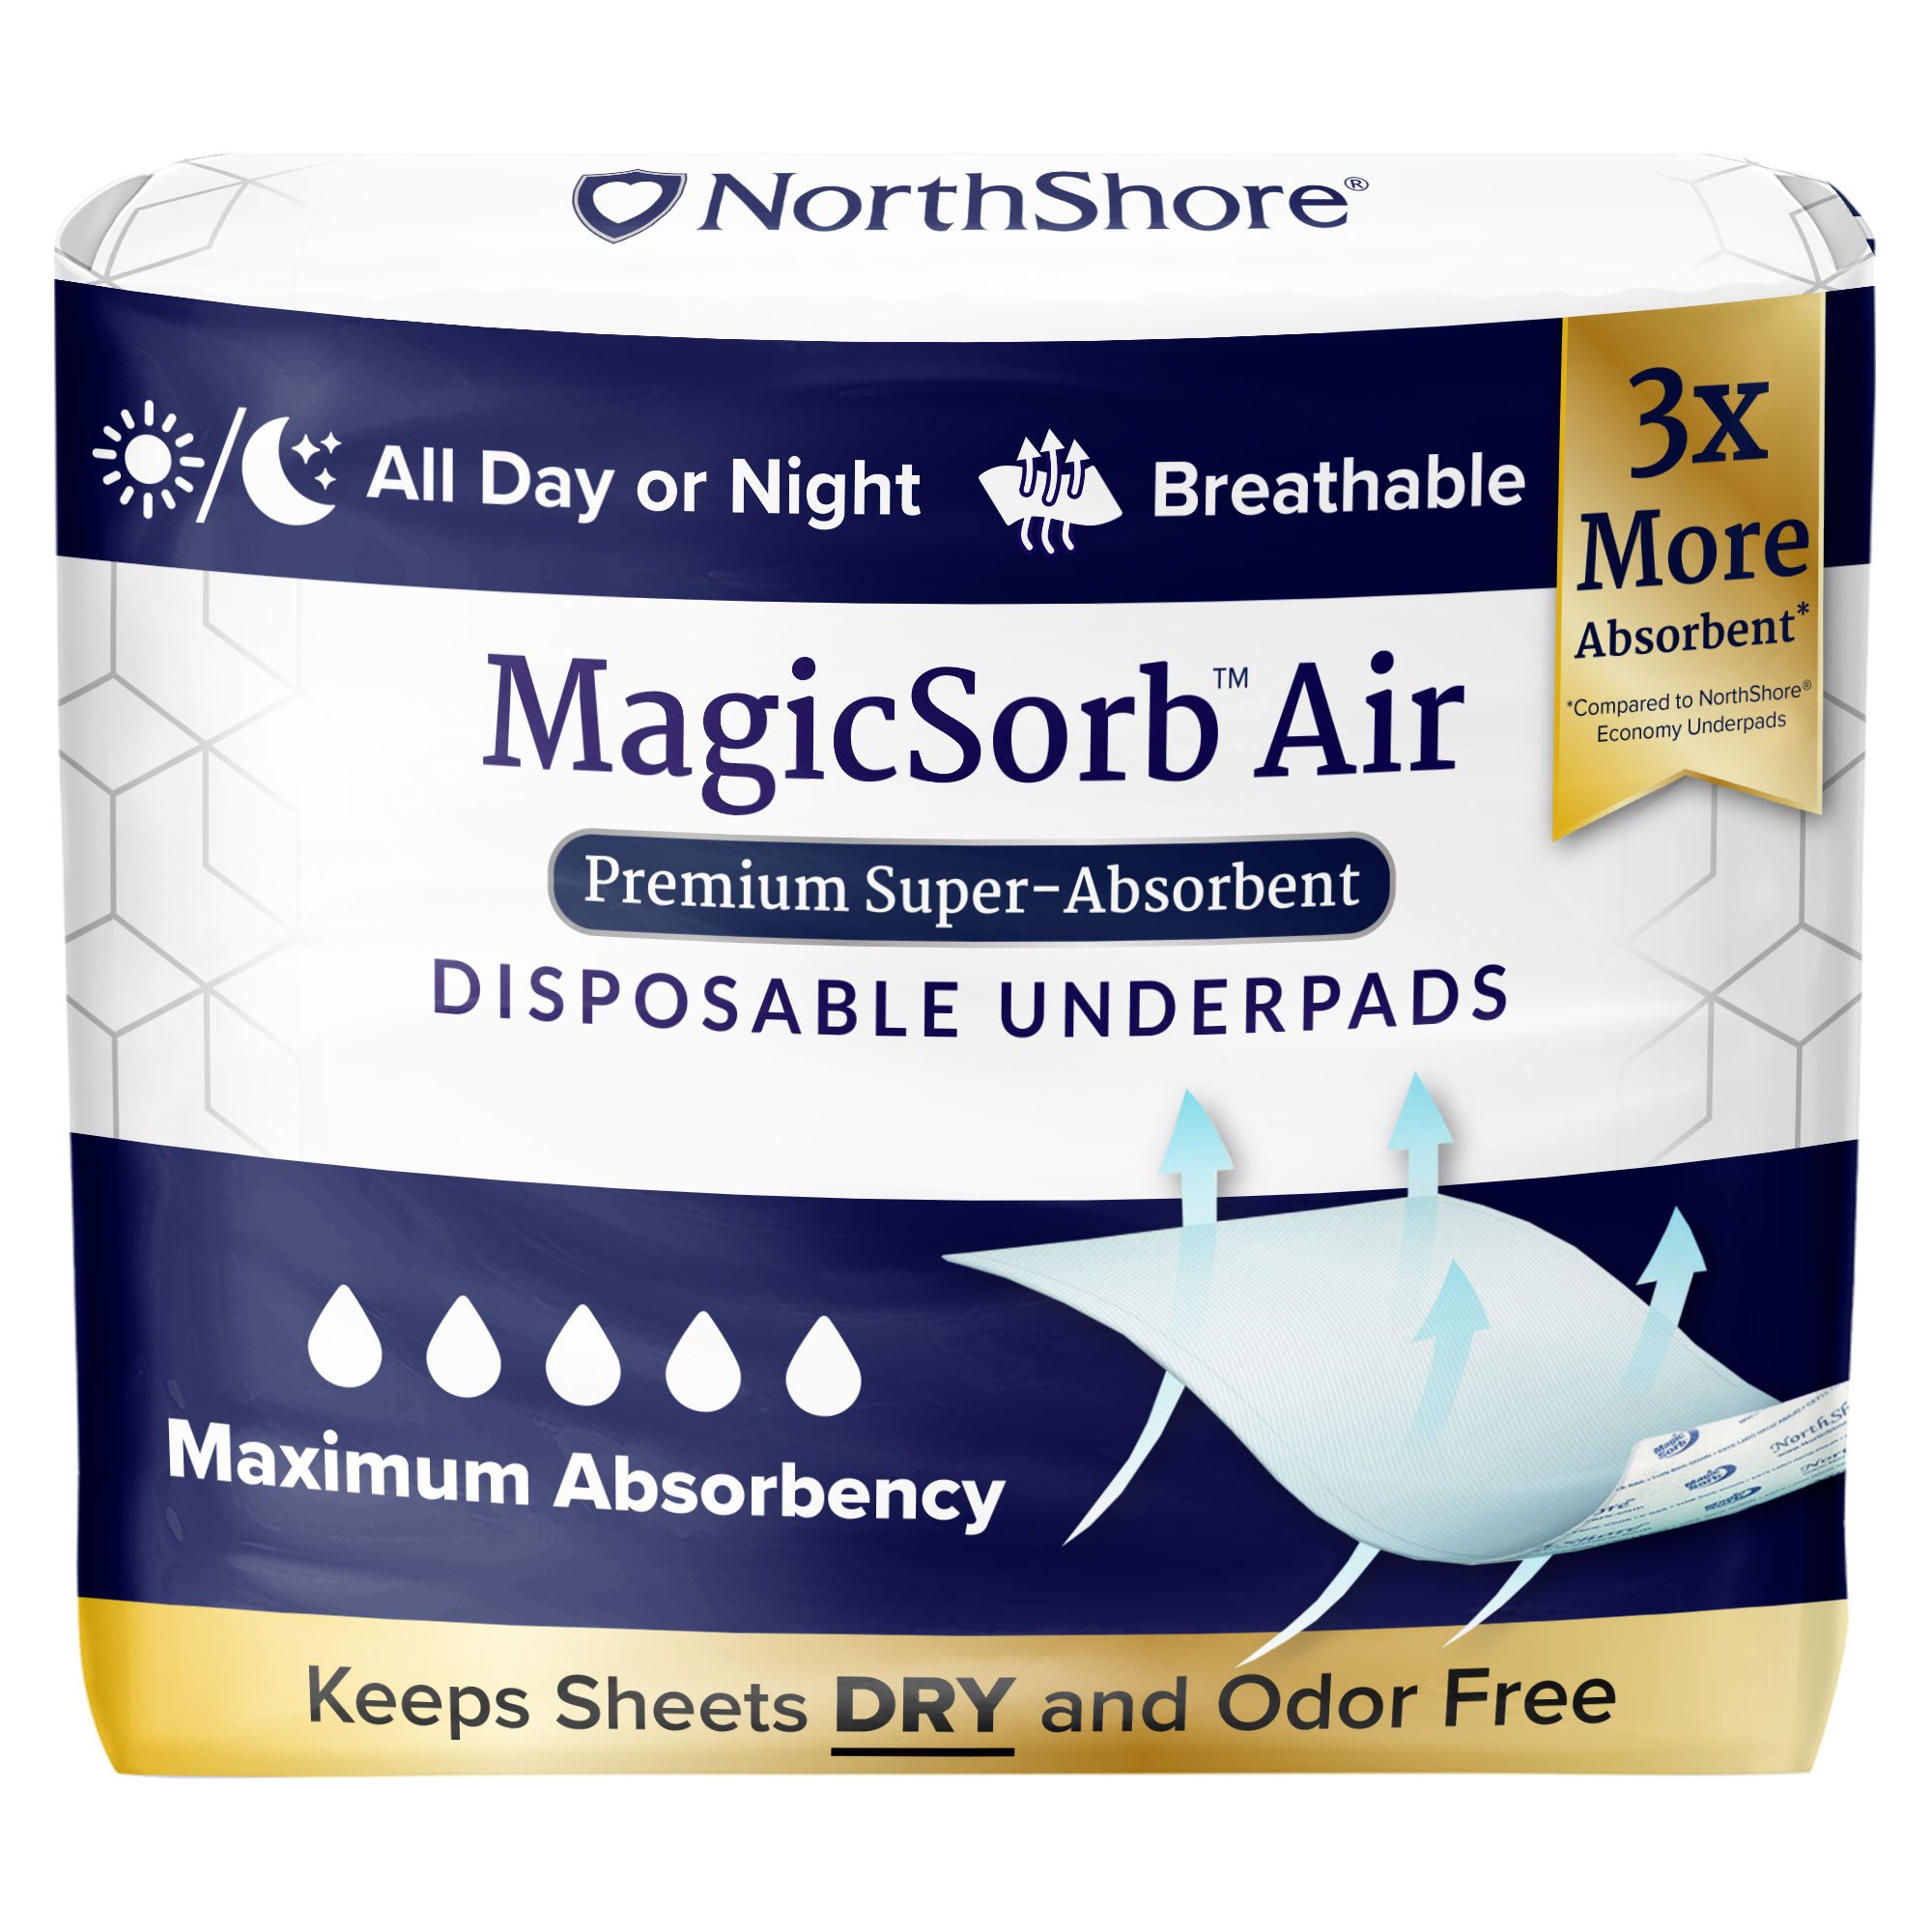 MagicSorb Air disposable incontinence bed pad